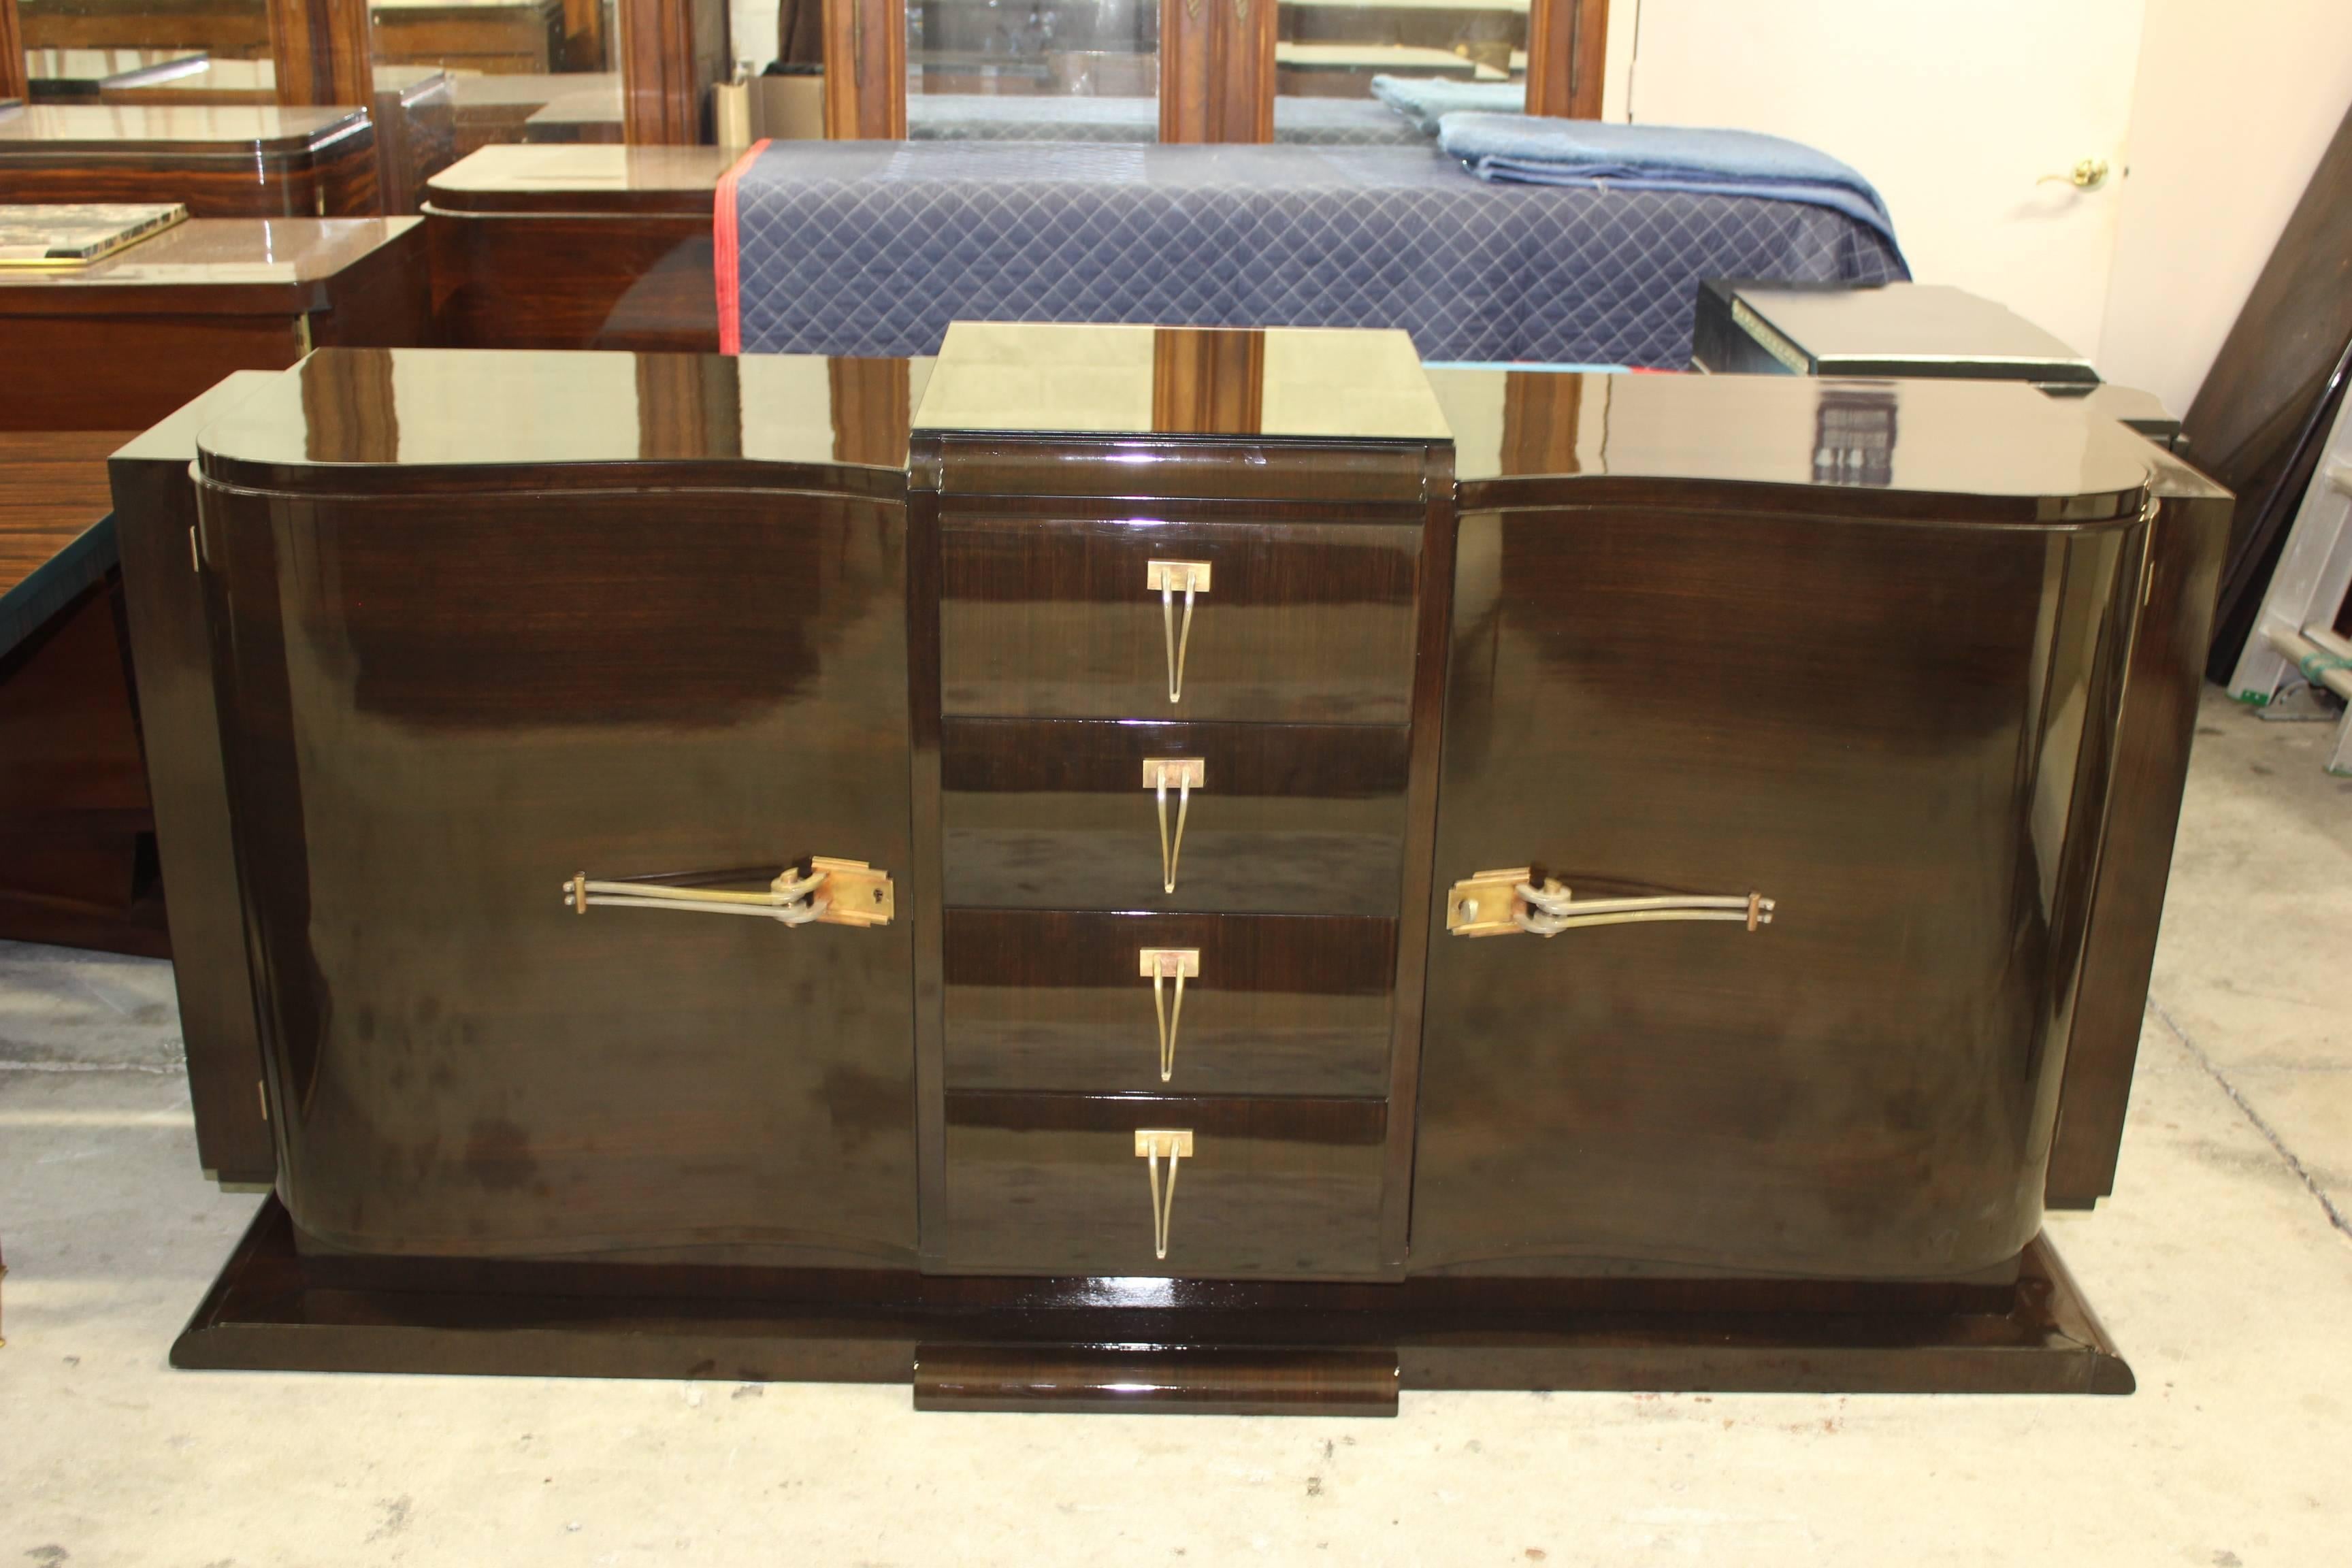 A stunning French Art Deco dark exotic Macassar Ebony Buffet/ Dry Bar, circa 1940s. Curved form, center bank of drawers. Elaborate hardware and gorgeous bronze tone mirrored center top panel for serving. There are glass shelves for the left and